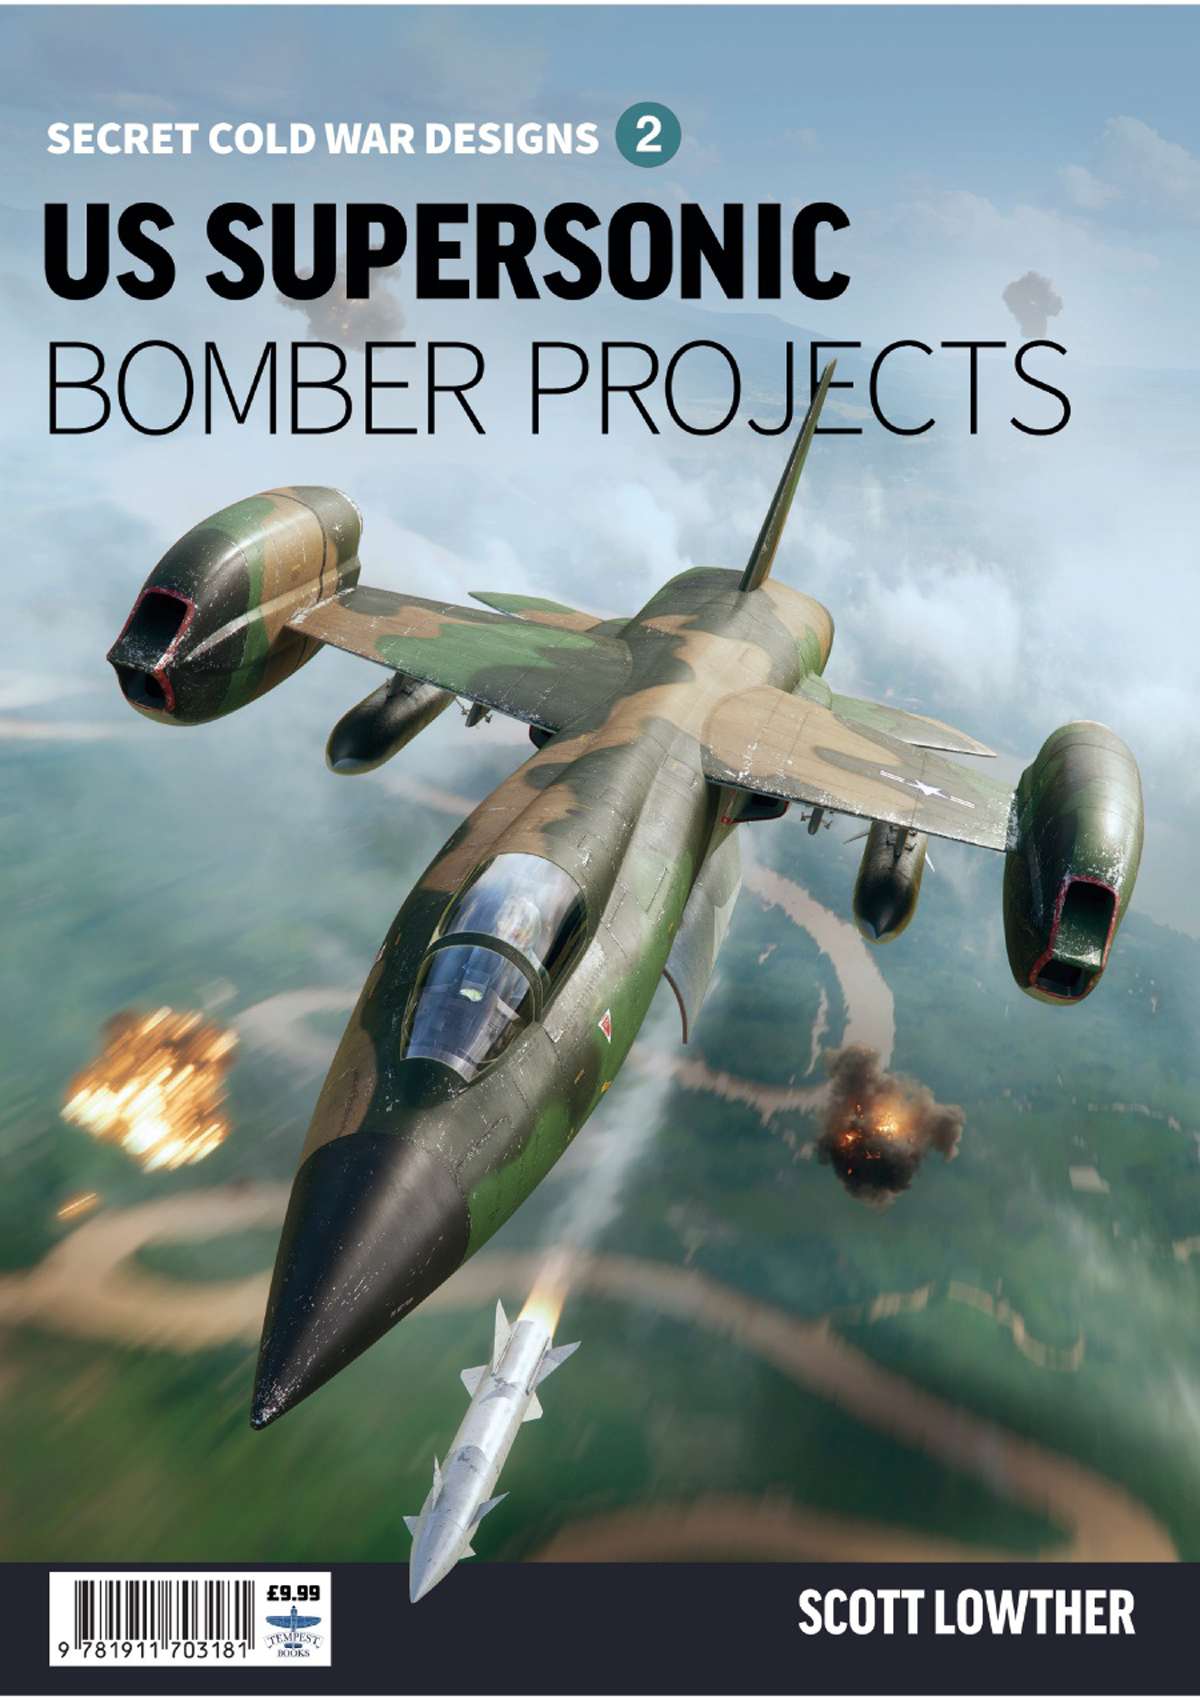 US Supersonic Bomber Projects 2